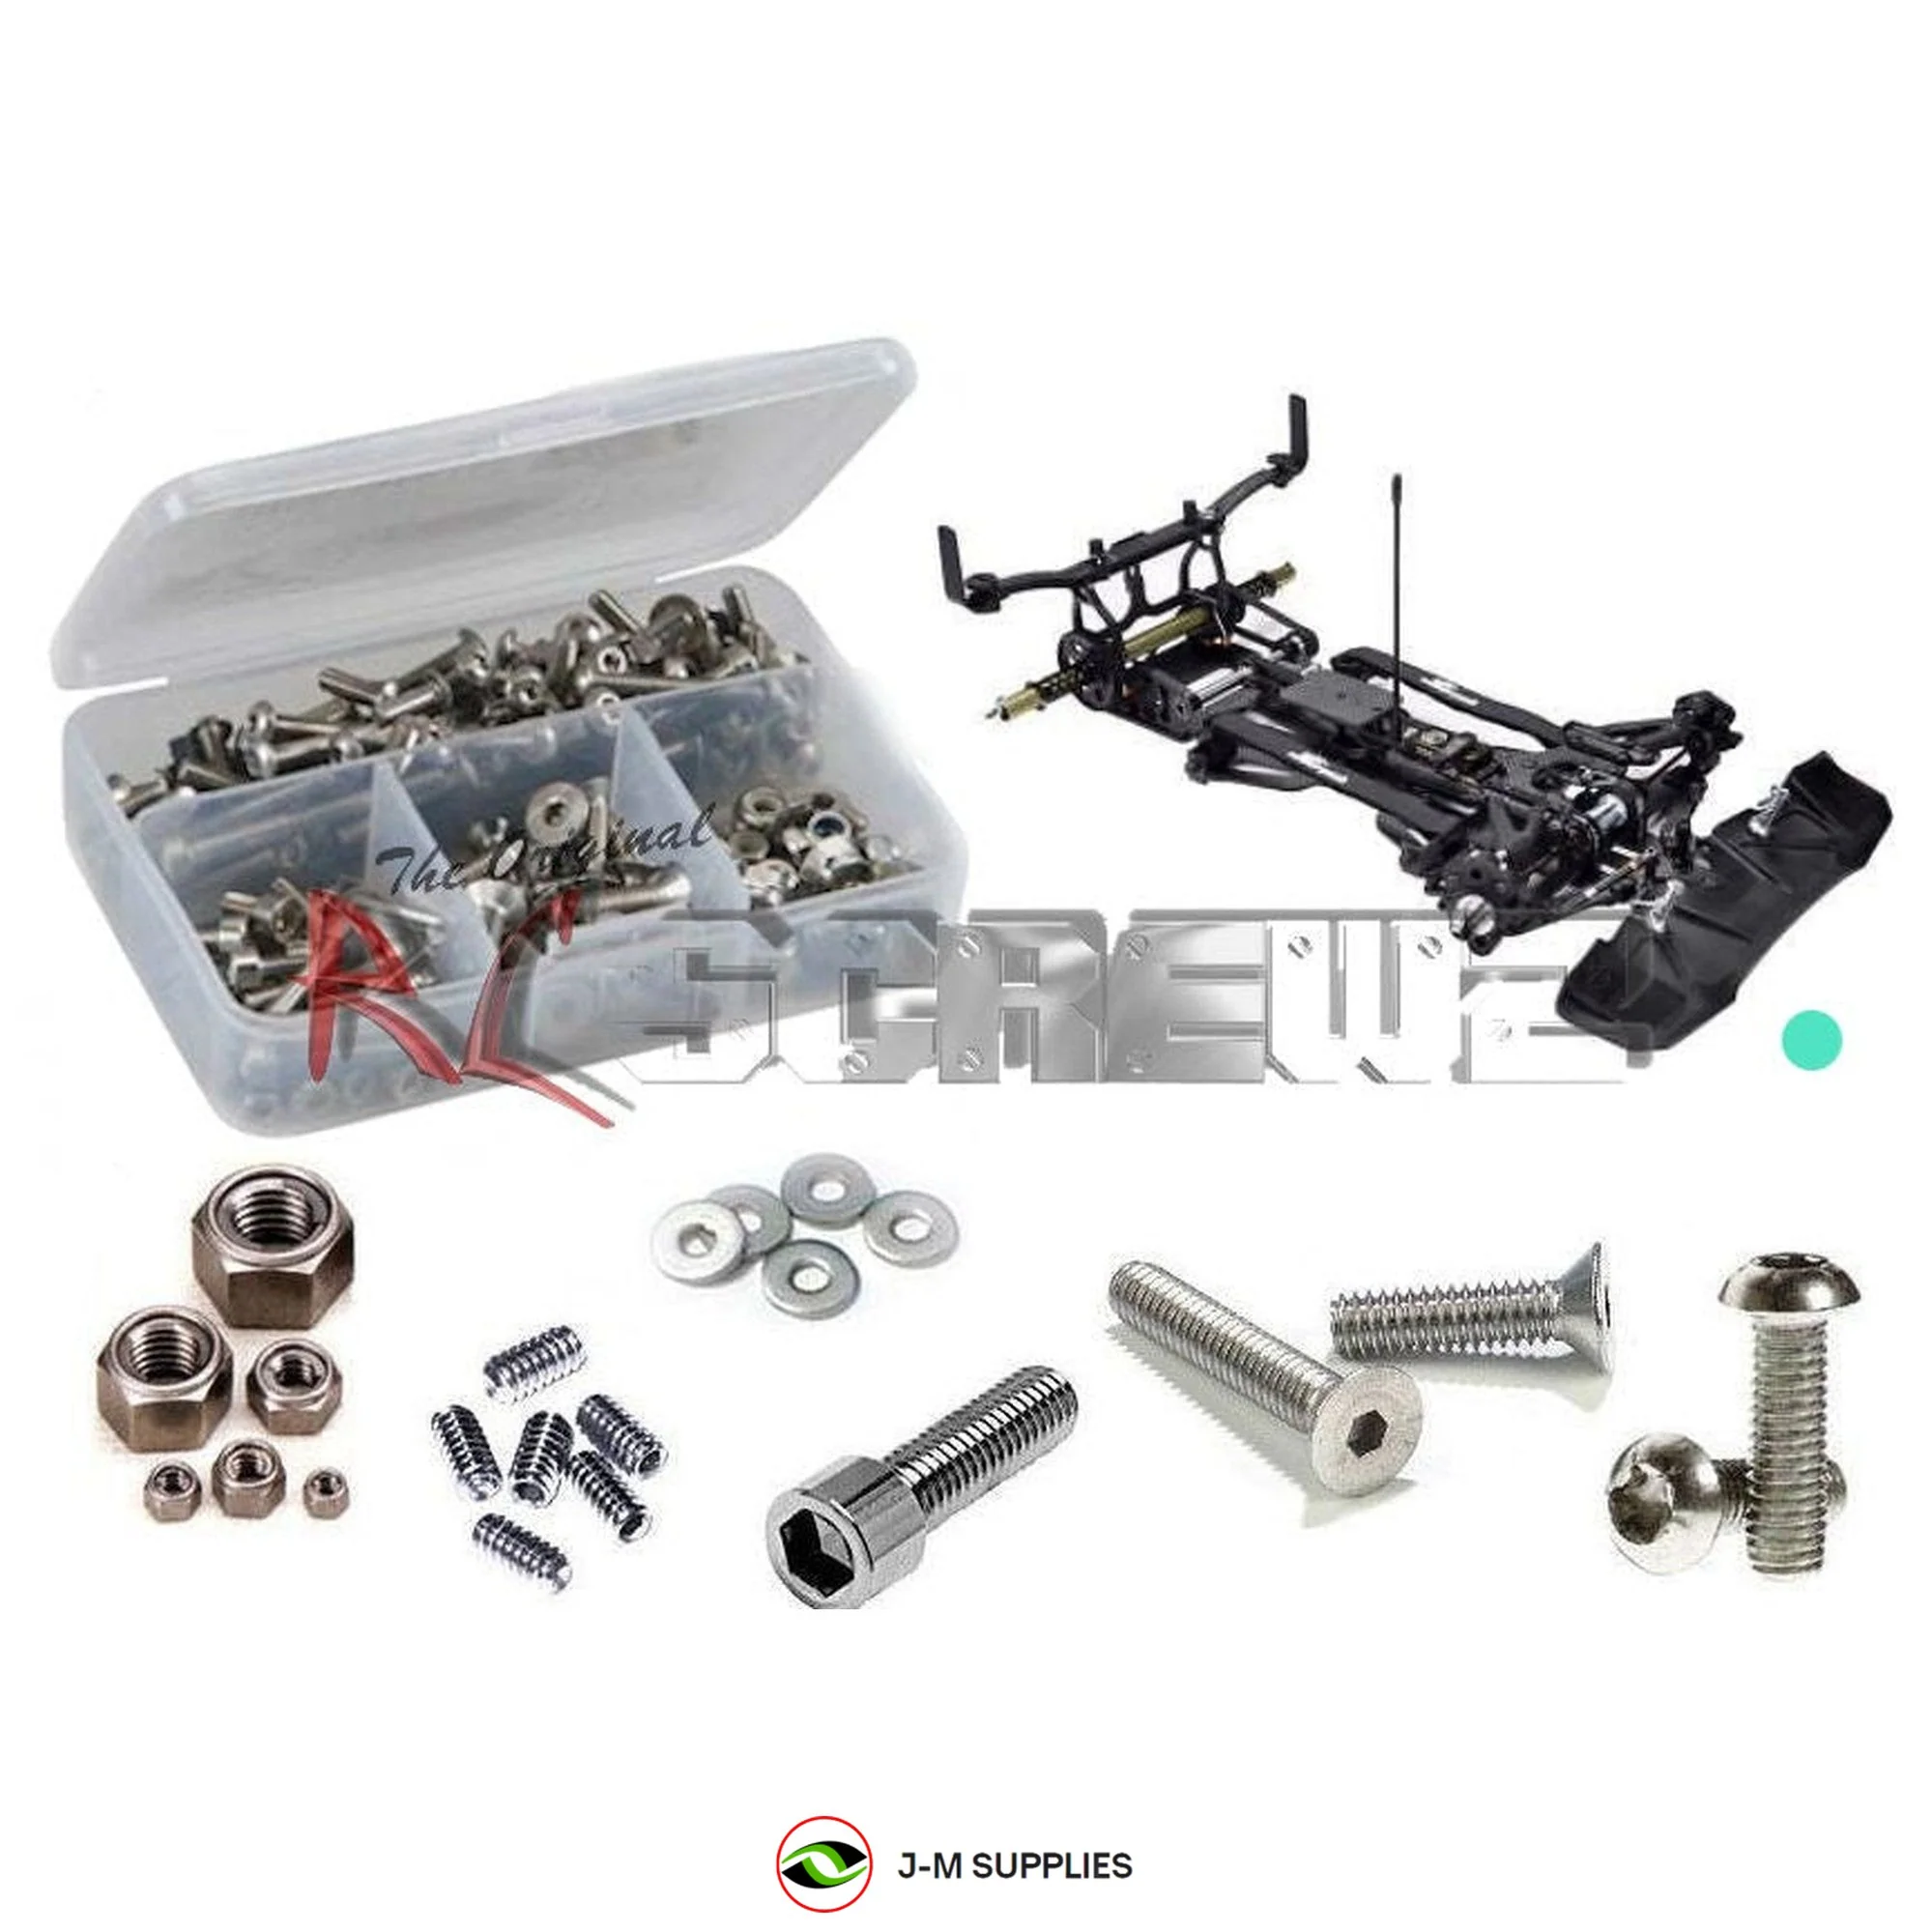 RCScrewZ Stainless Screw Kit ser094 for Serpent Taipan 988e 1/8 #905001 RC | PRO - Picture 1 of 12